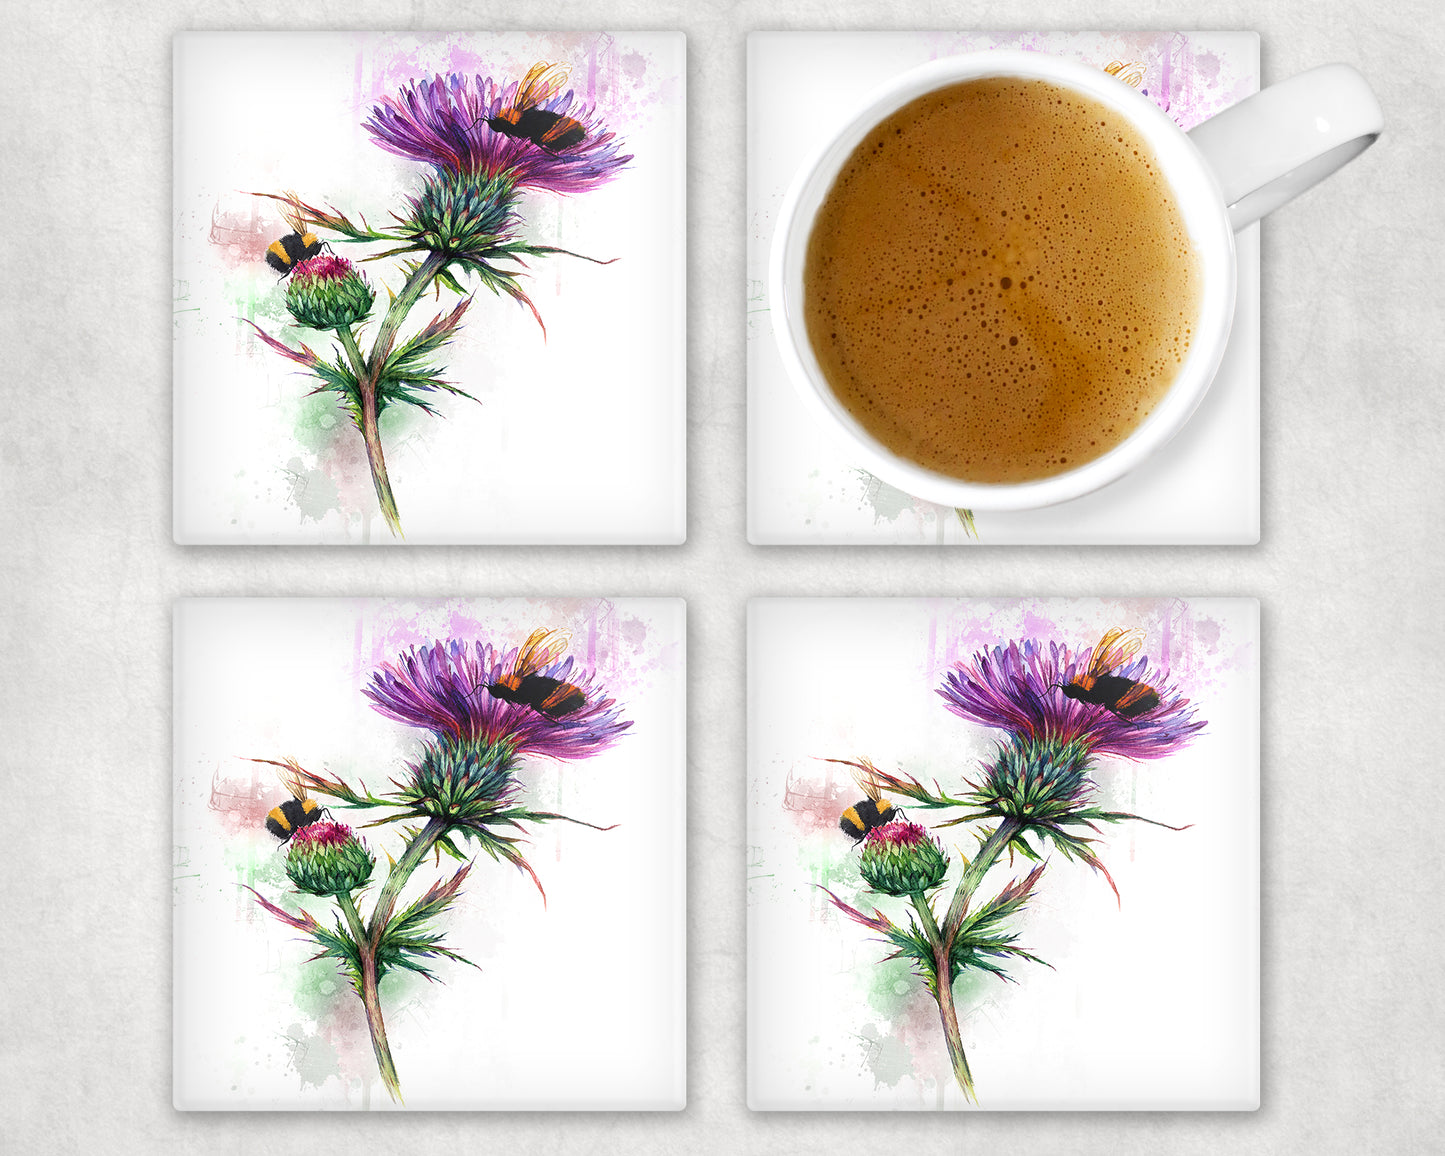 Thistle and Bees Glass  Coaster, Drinks Holder, Buzzy Bees Coaster, Scotland, Scottish Gift, Buzzy Bees Gift